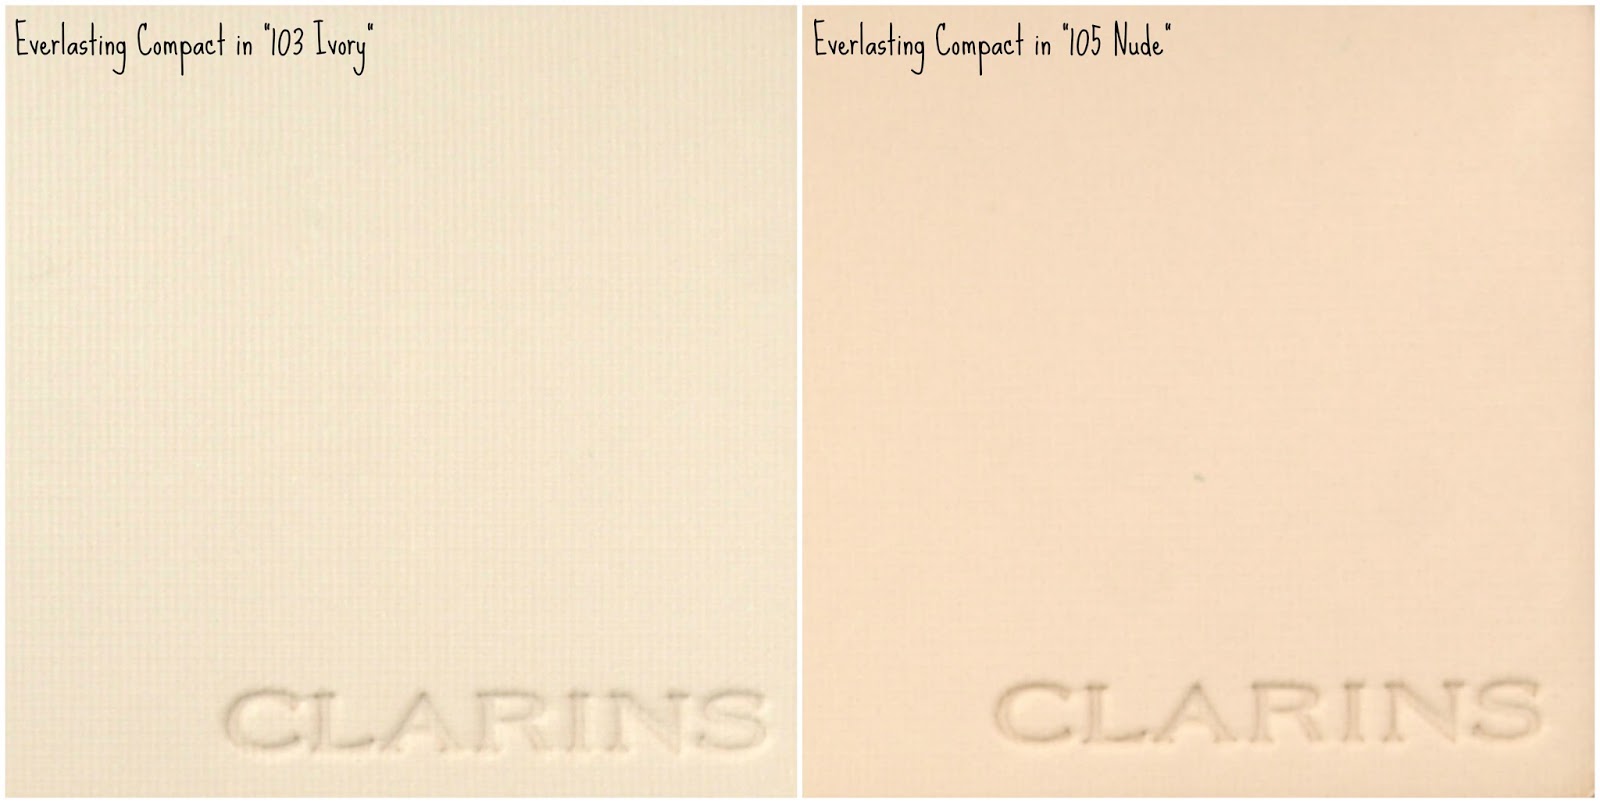 Clarins Everlasting+ Compact Foundation in "103 Ivory" & "105 Nude": Review and Swatches